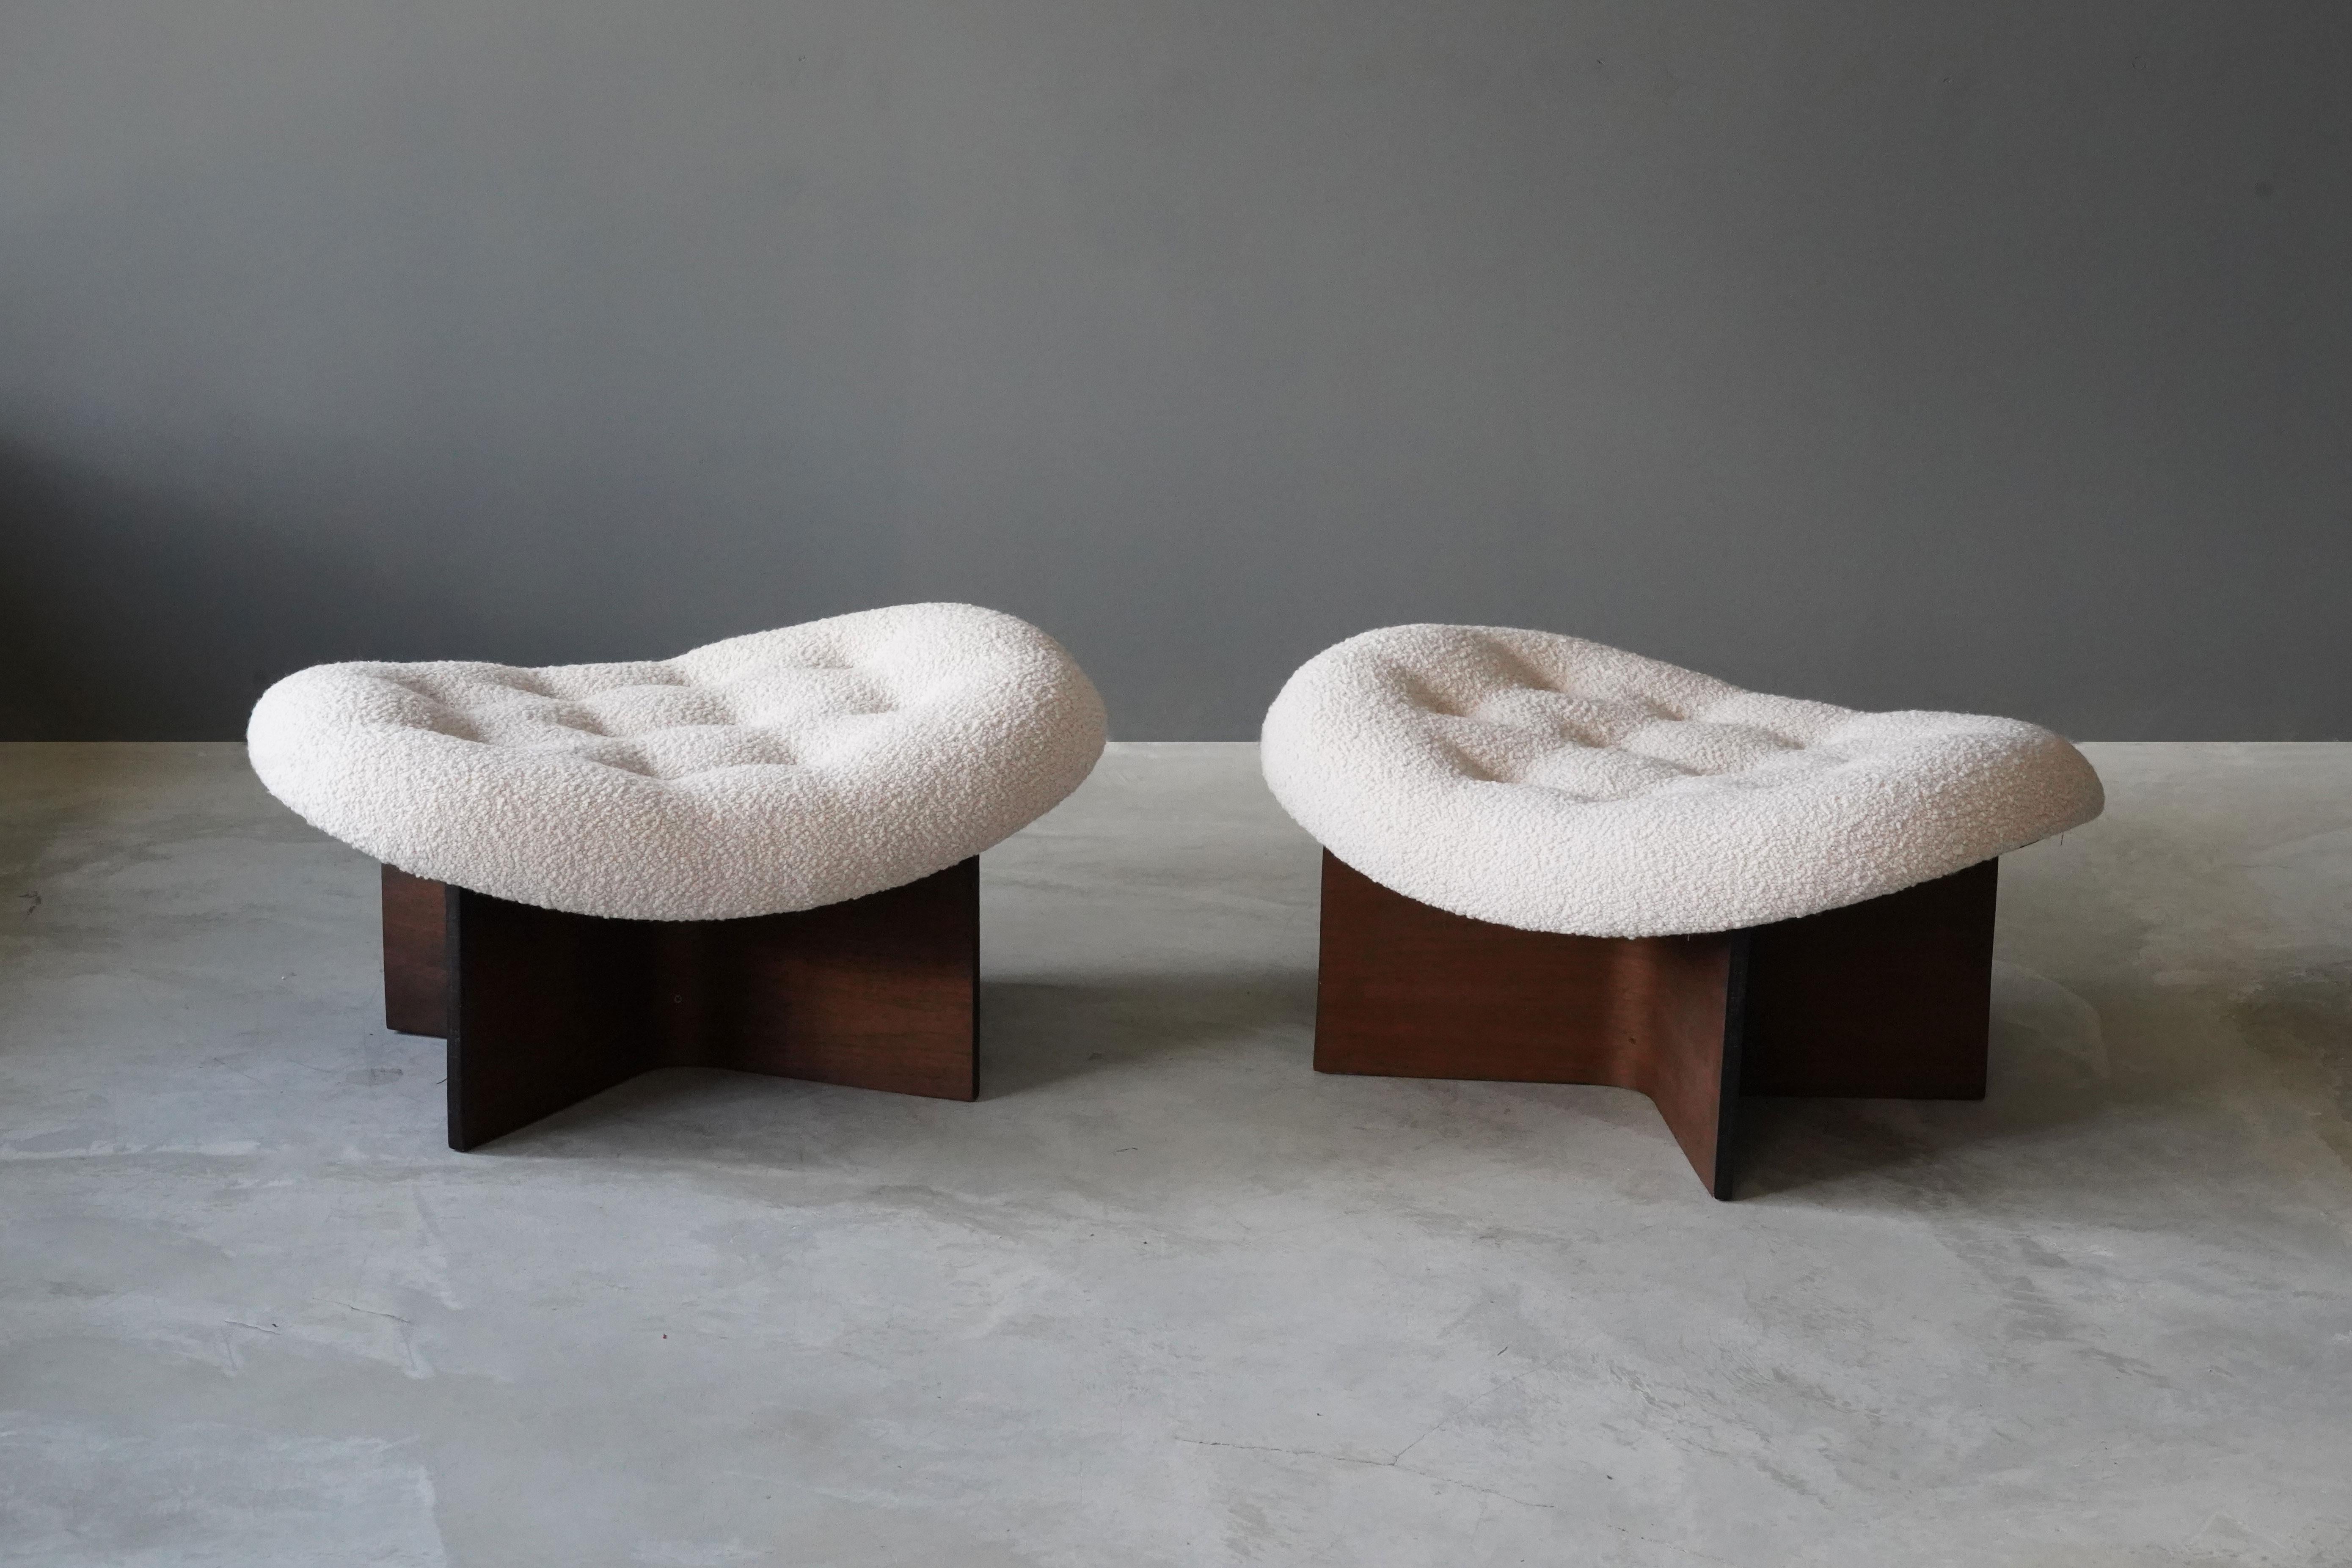 A pair of stools or ottomans, walnut, white bouclé, USA, 1960s. Reupholstered in brand new high-end fabric.

Other designers of the period include Paul Frankl, T.H. Robsjohn-Gibbings, Jean Royere, Vladimir Kagan, and George Nakashima.